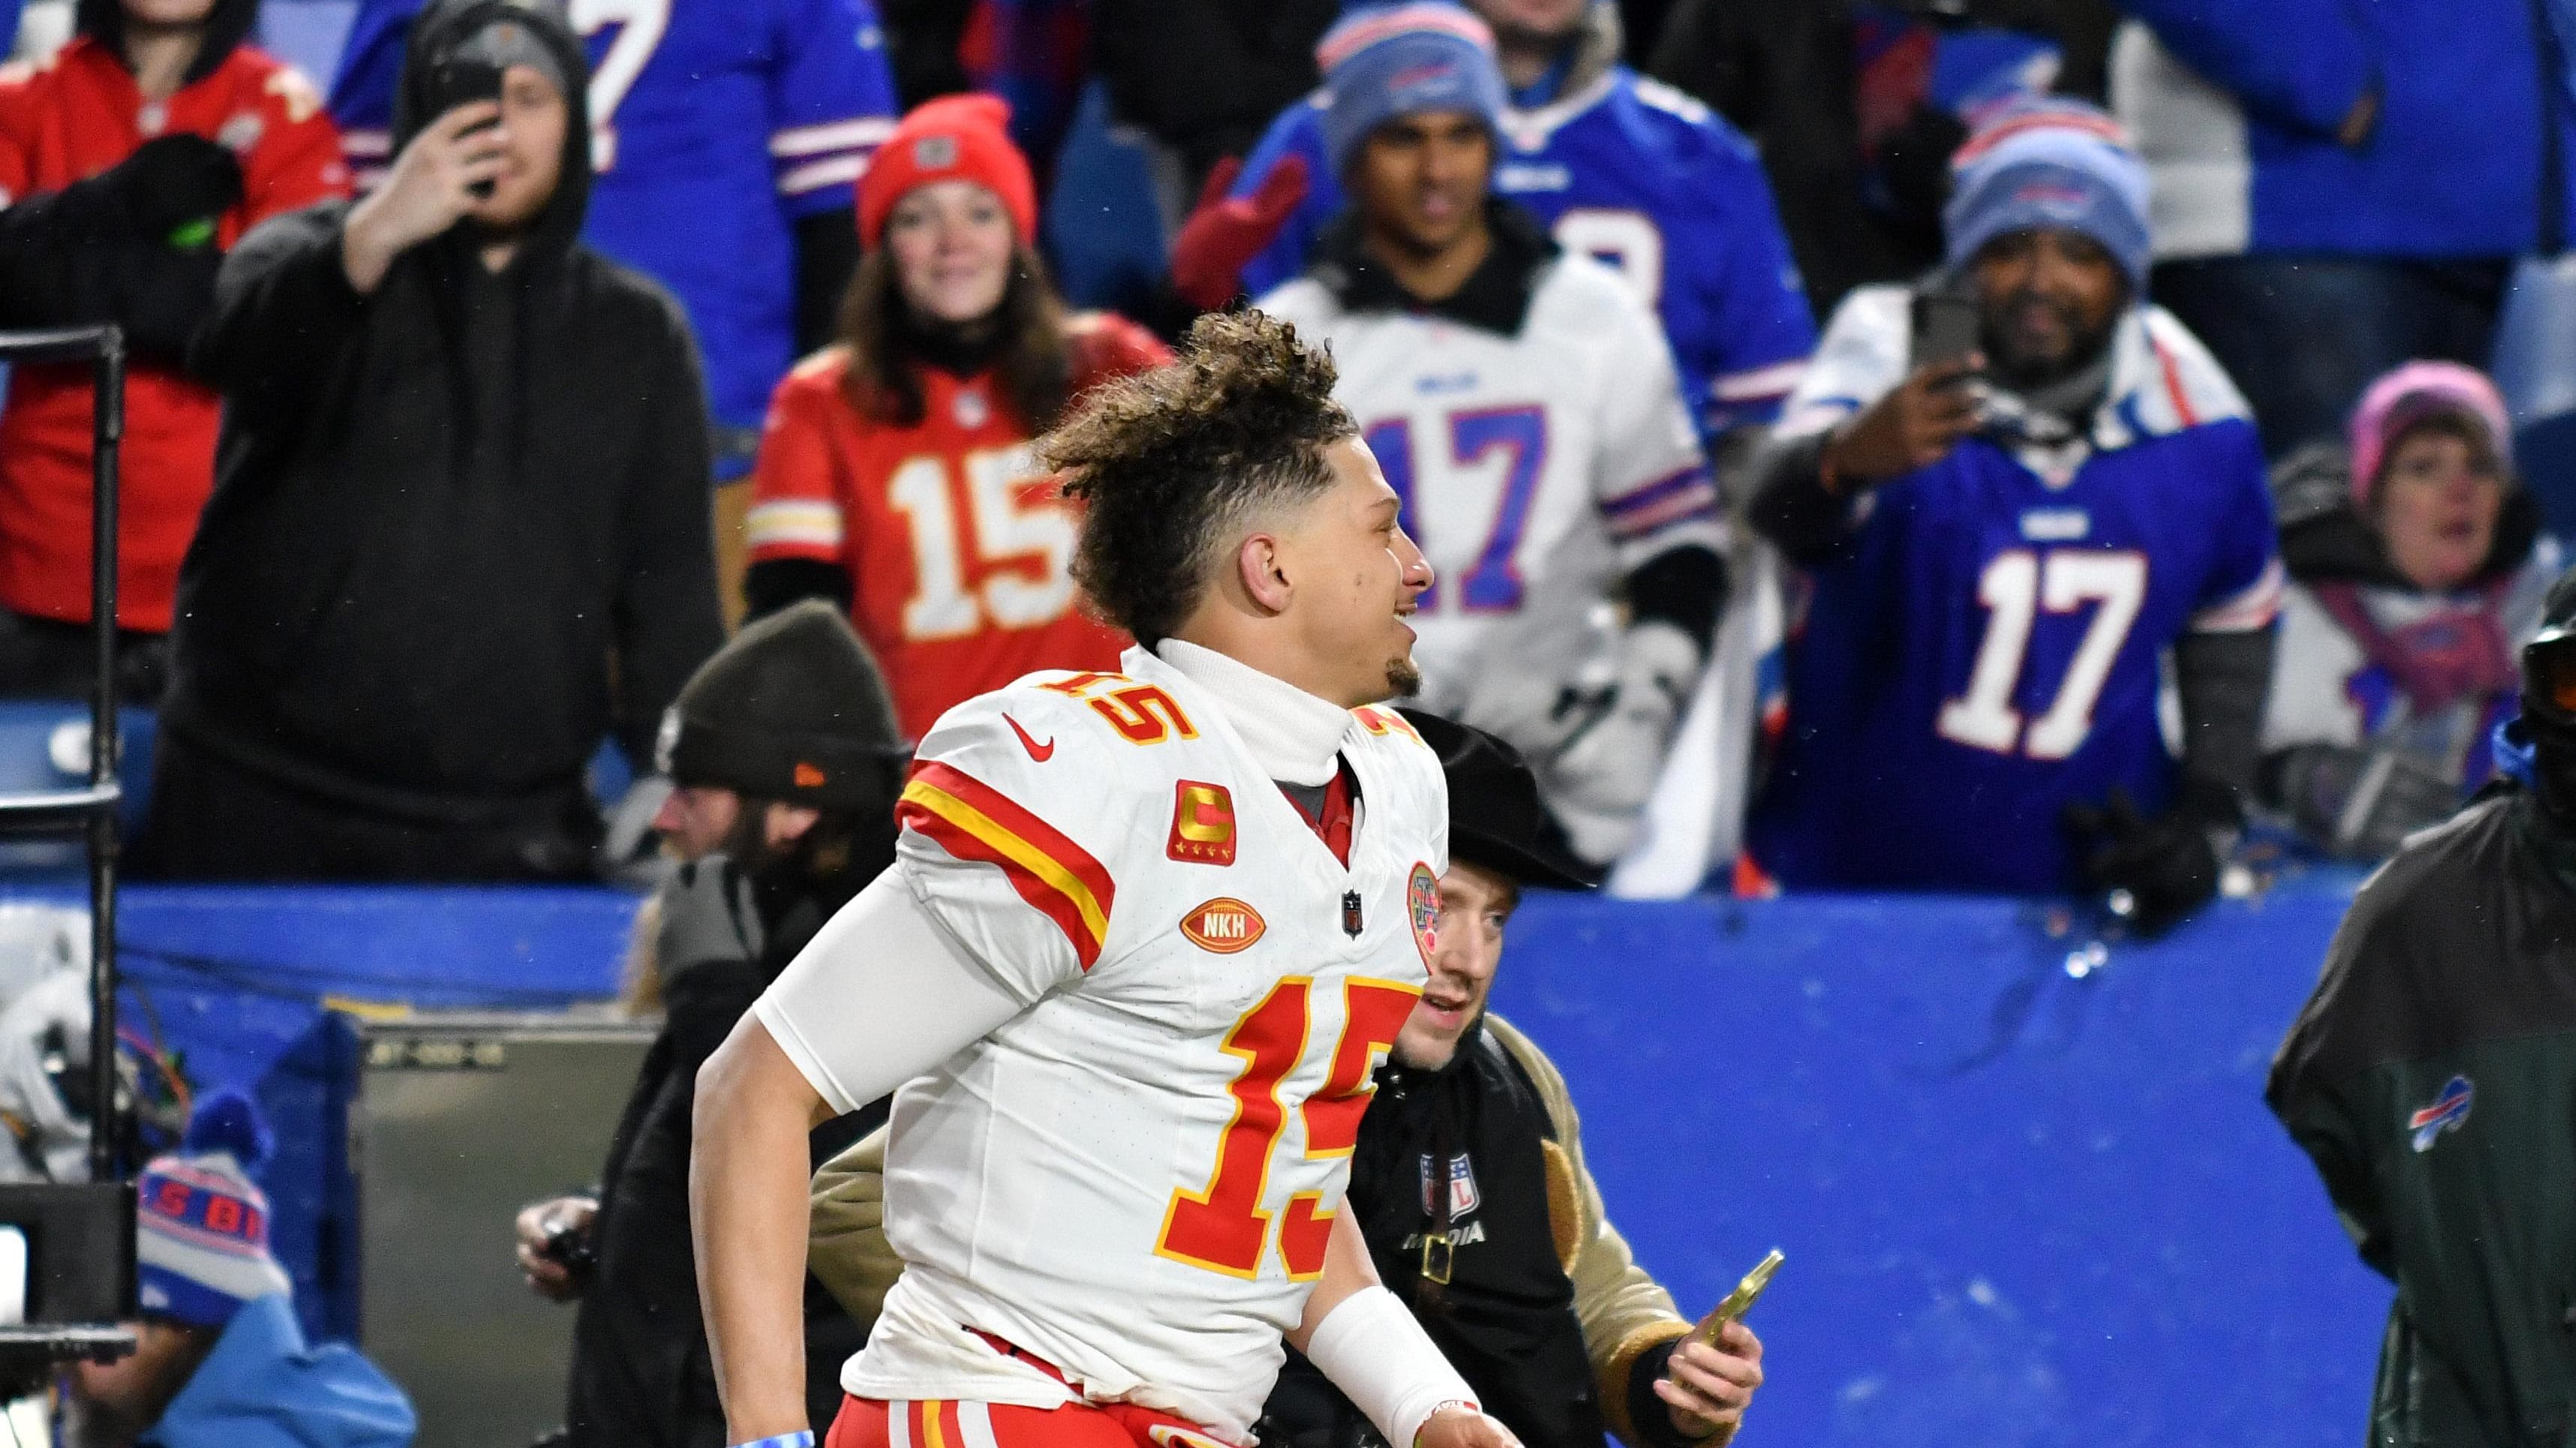 Patrick Mahomes didn't realize he was a 'villain' until Bills Mafia pelted him with snowballs